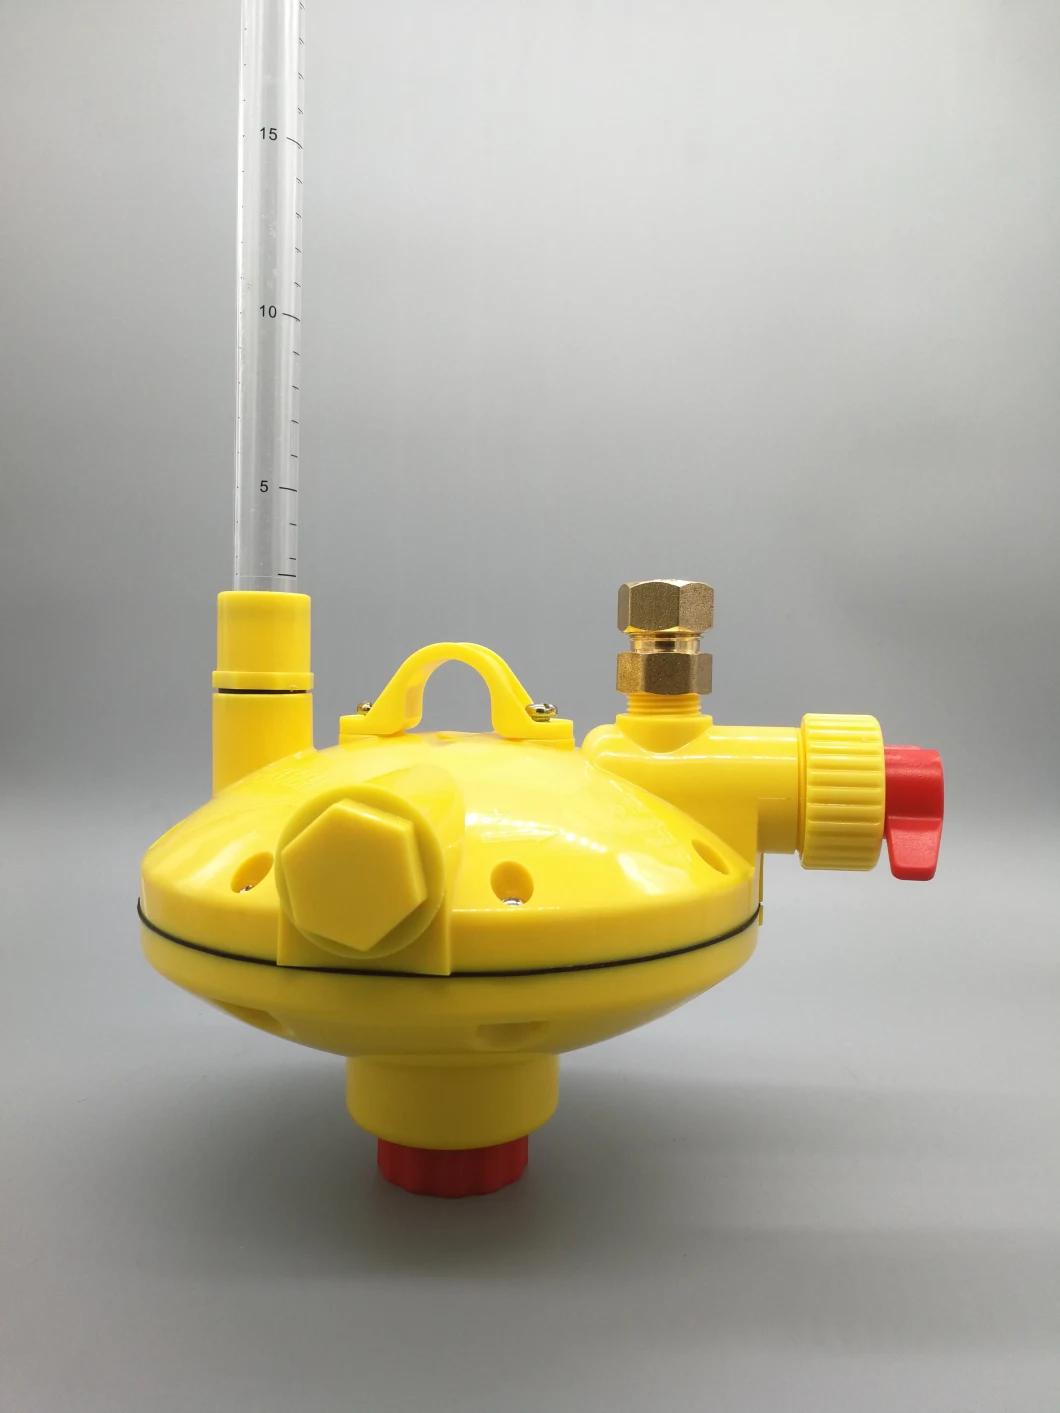 High Quality Poultry Equipment of Water Regulator / Chicken Watering Sysytem